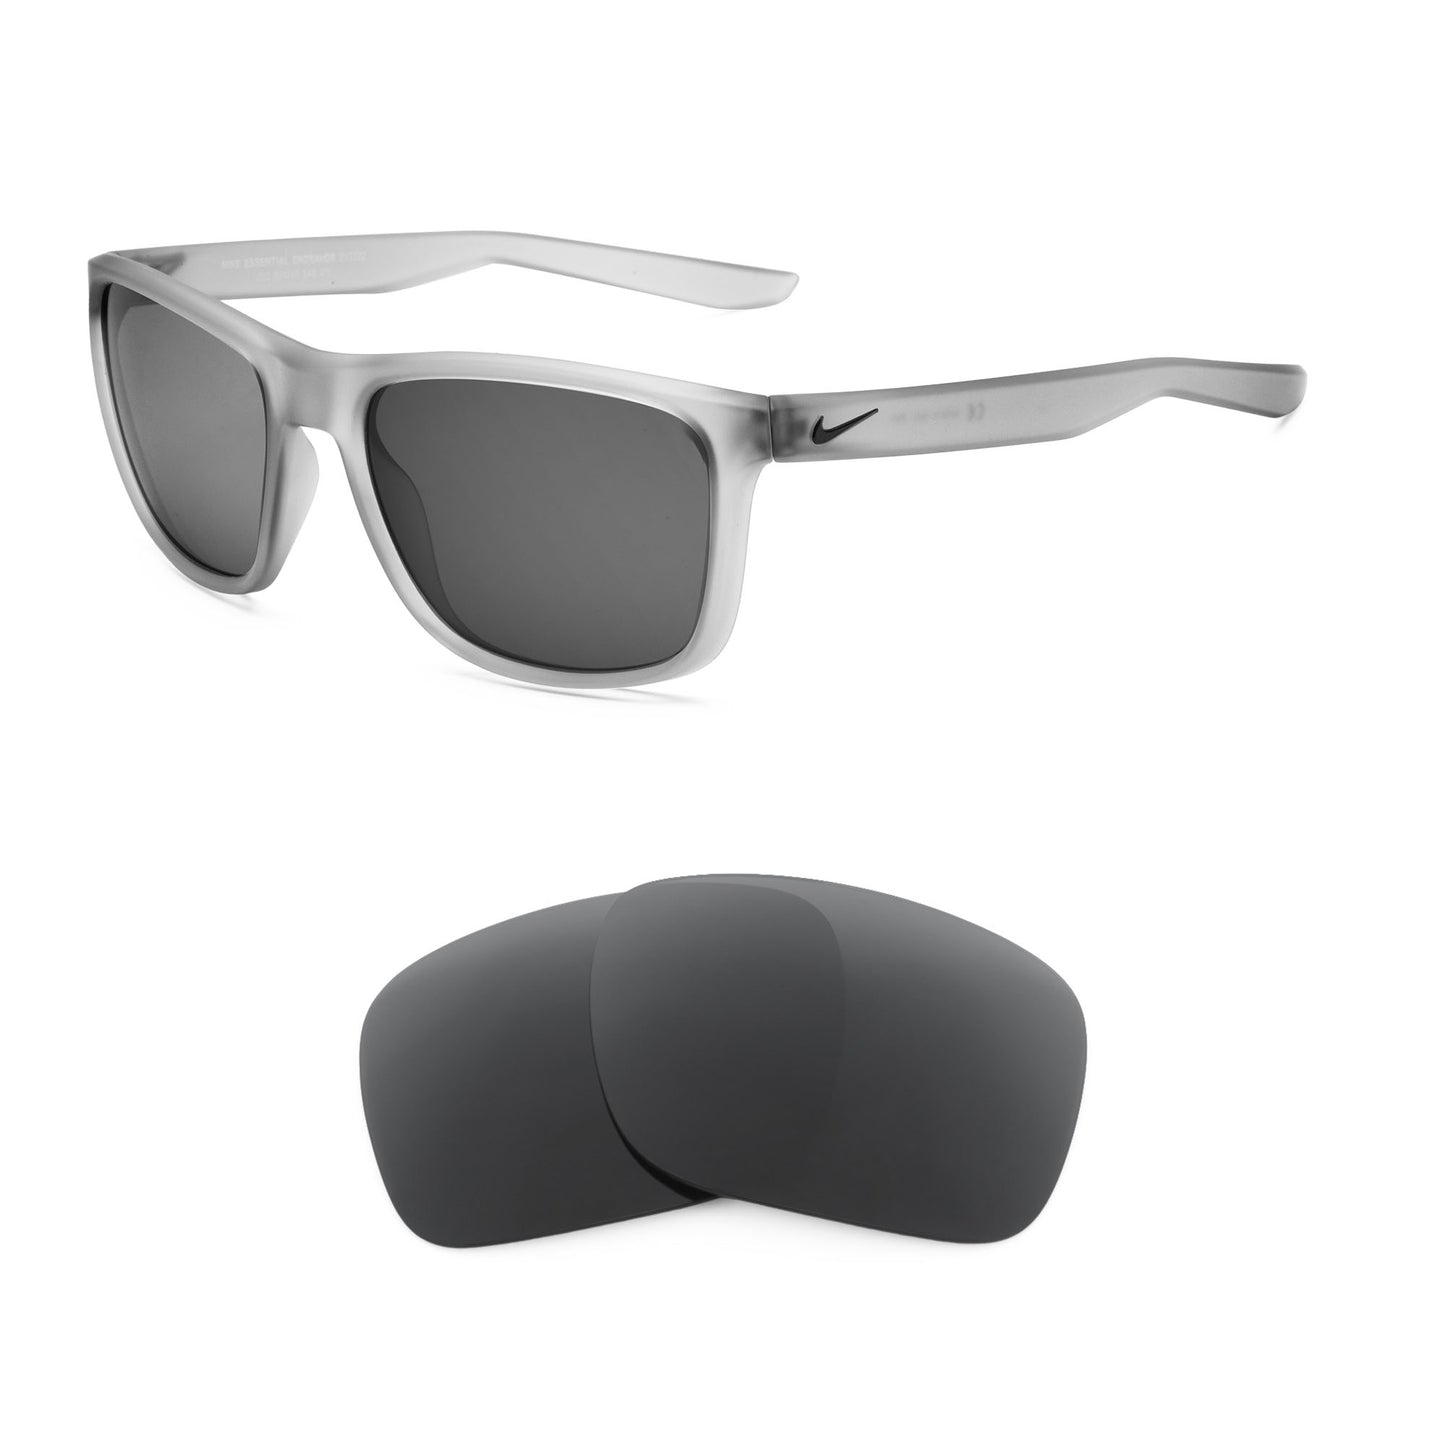 Nike Endeavor sunglasses with replacement lenses